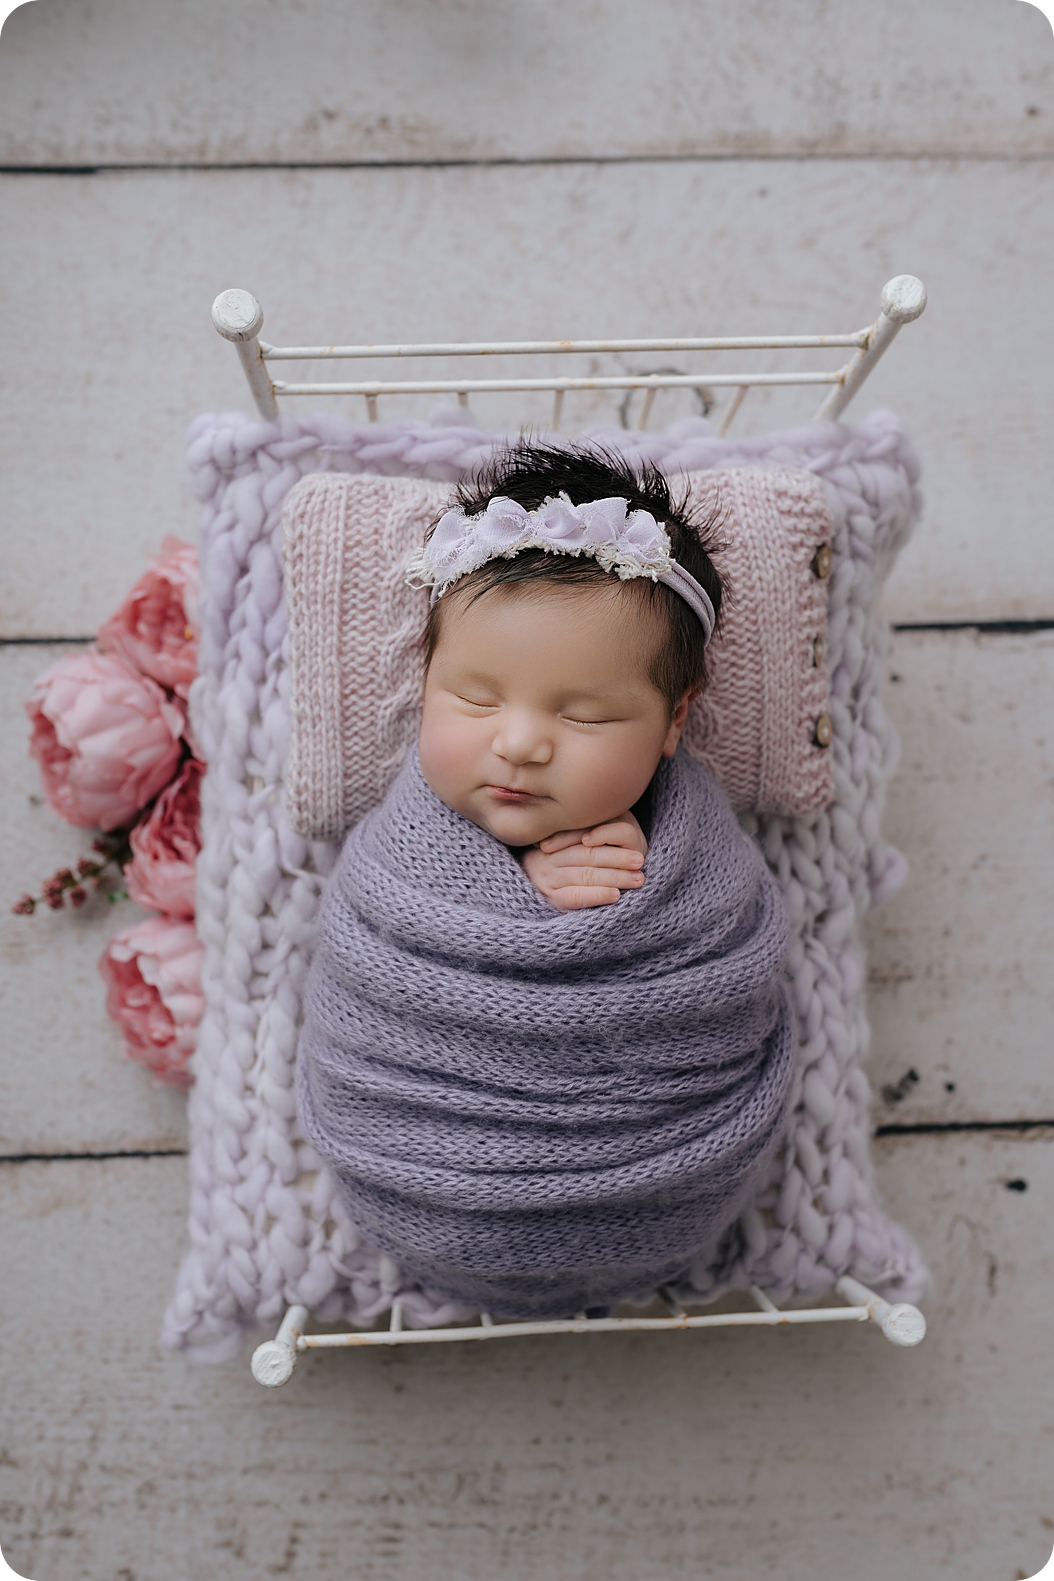 baby girl sleeps on bed with purple knit wrap